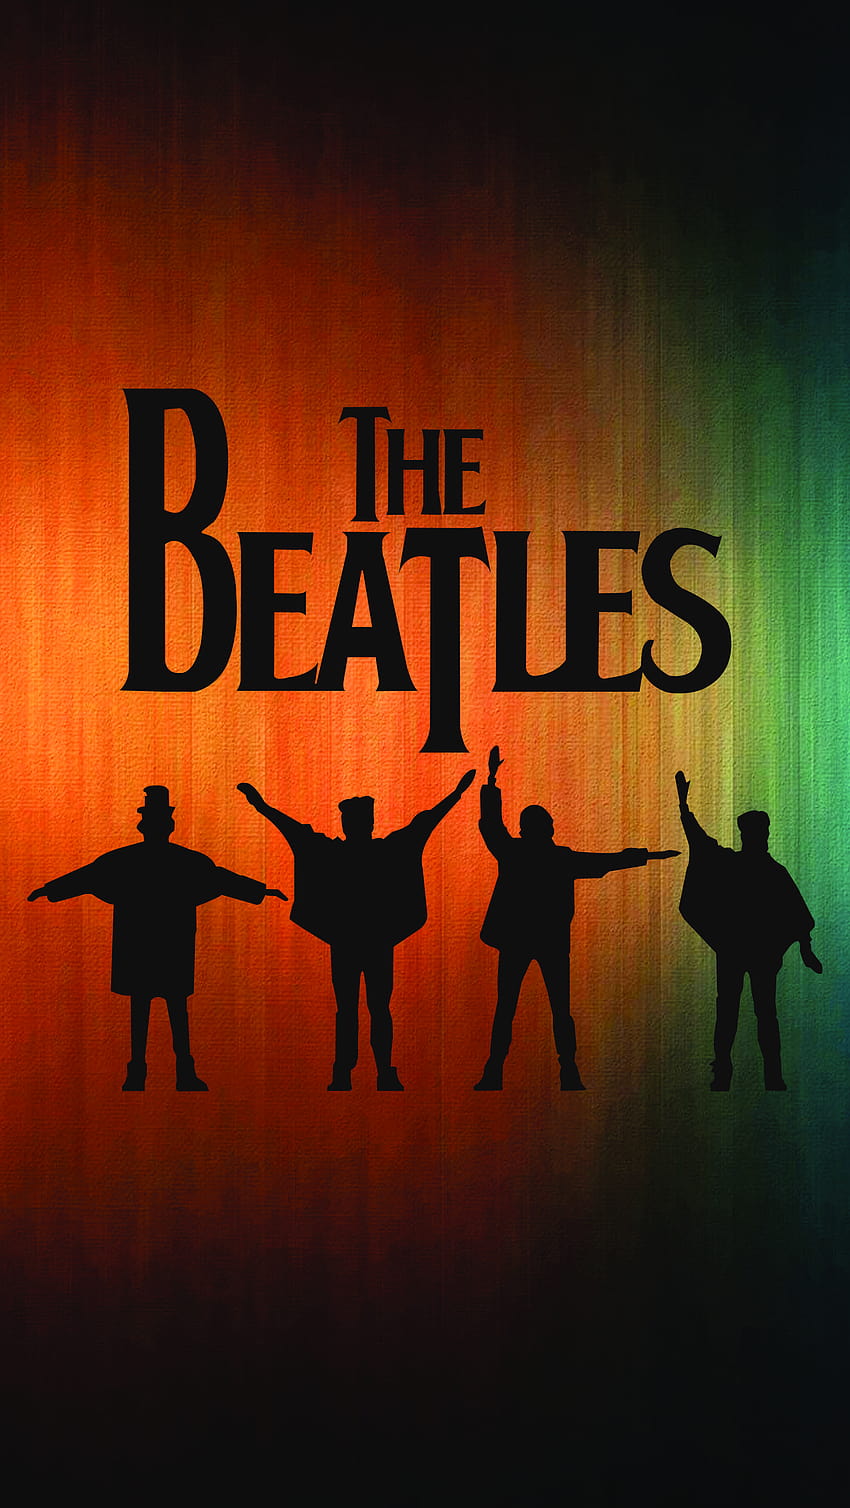 The Beatles Phone, android beatles wallpaper ponsel HD